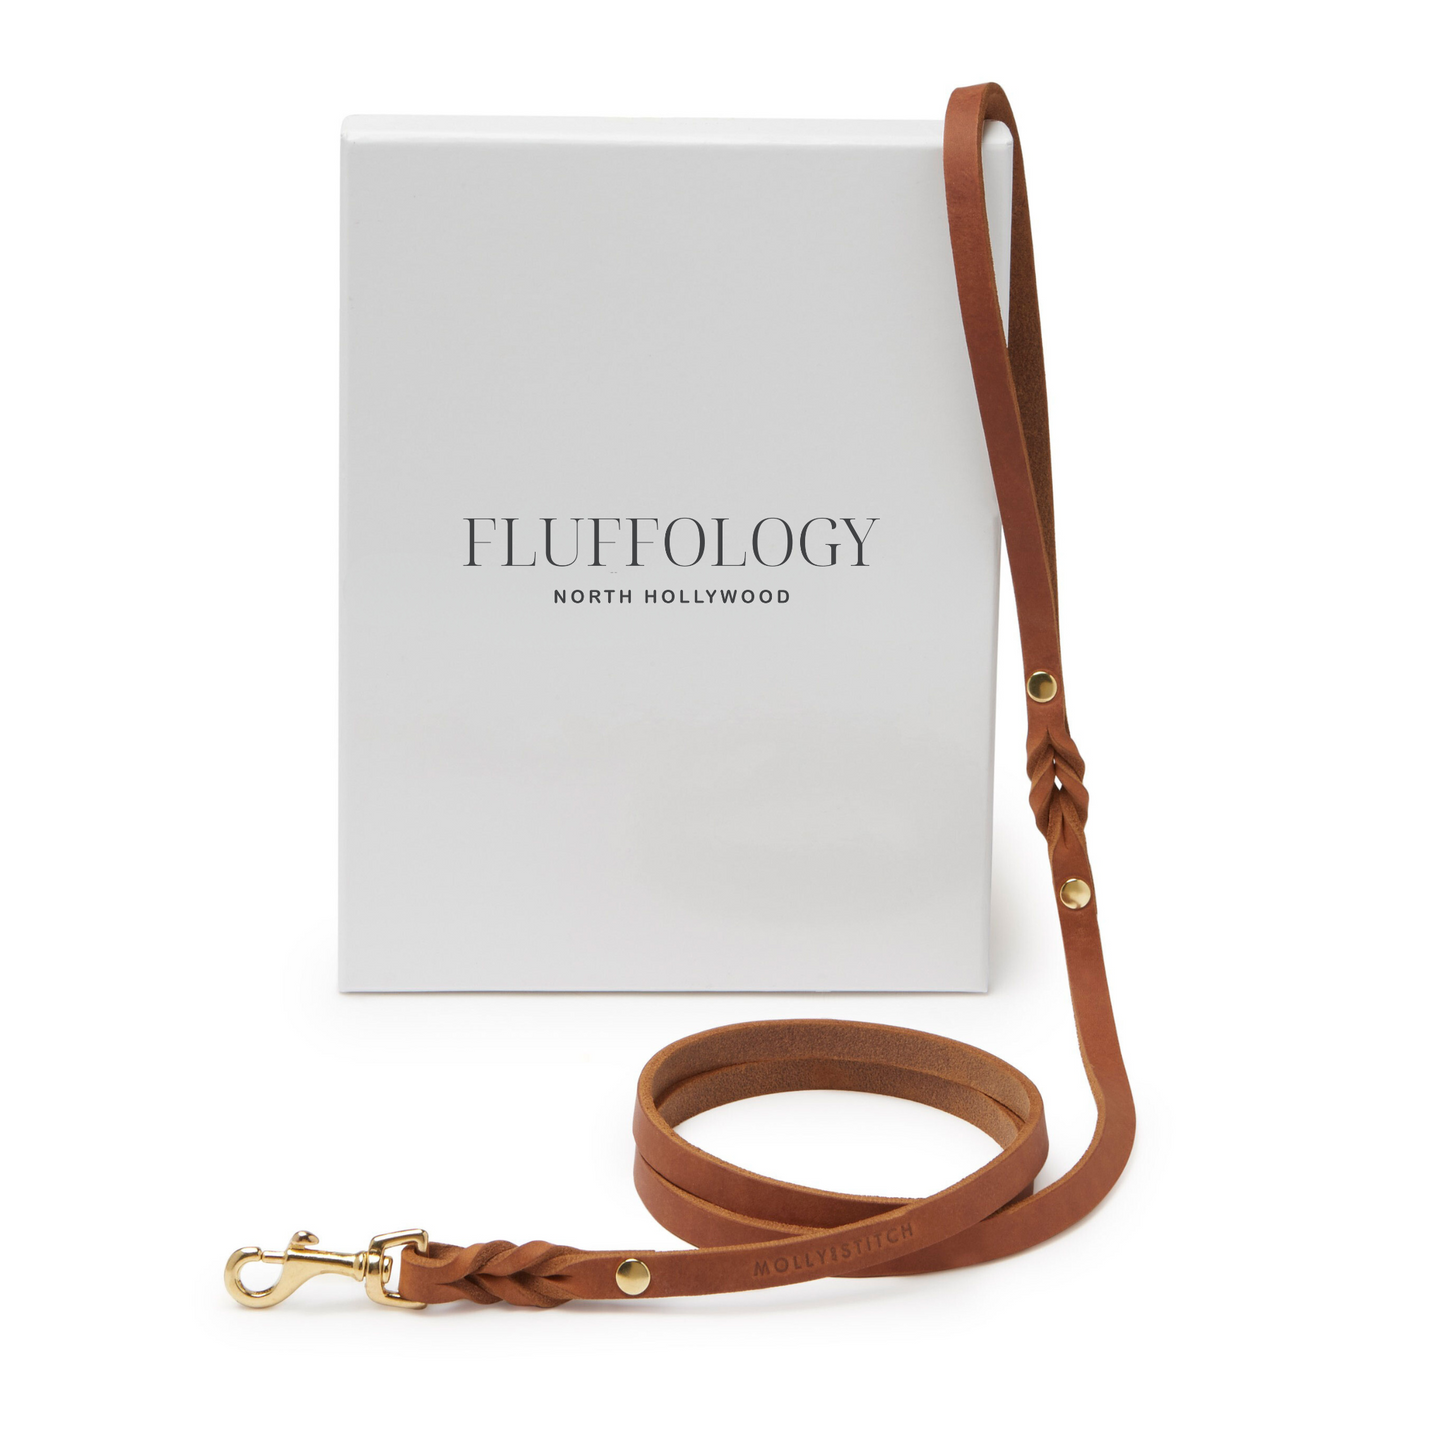 Butter Leather City Dog Leash